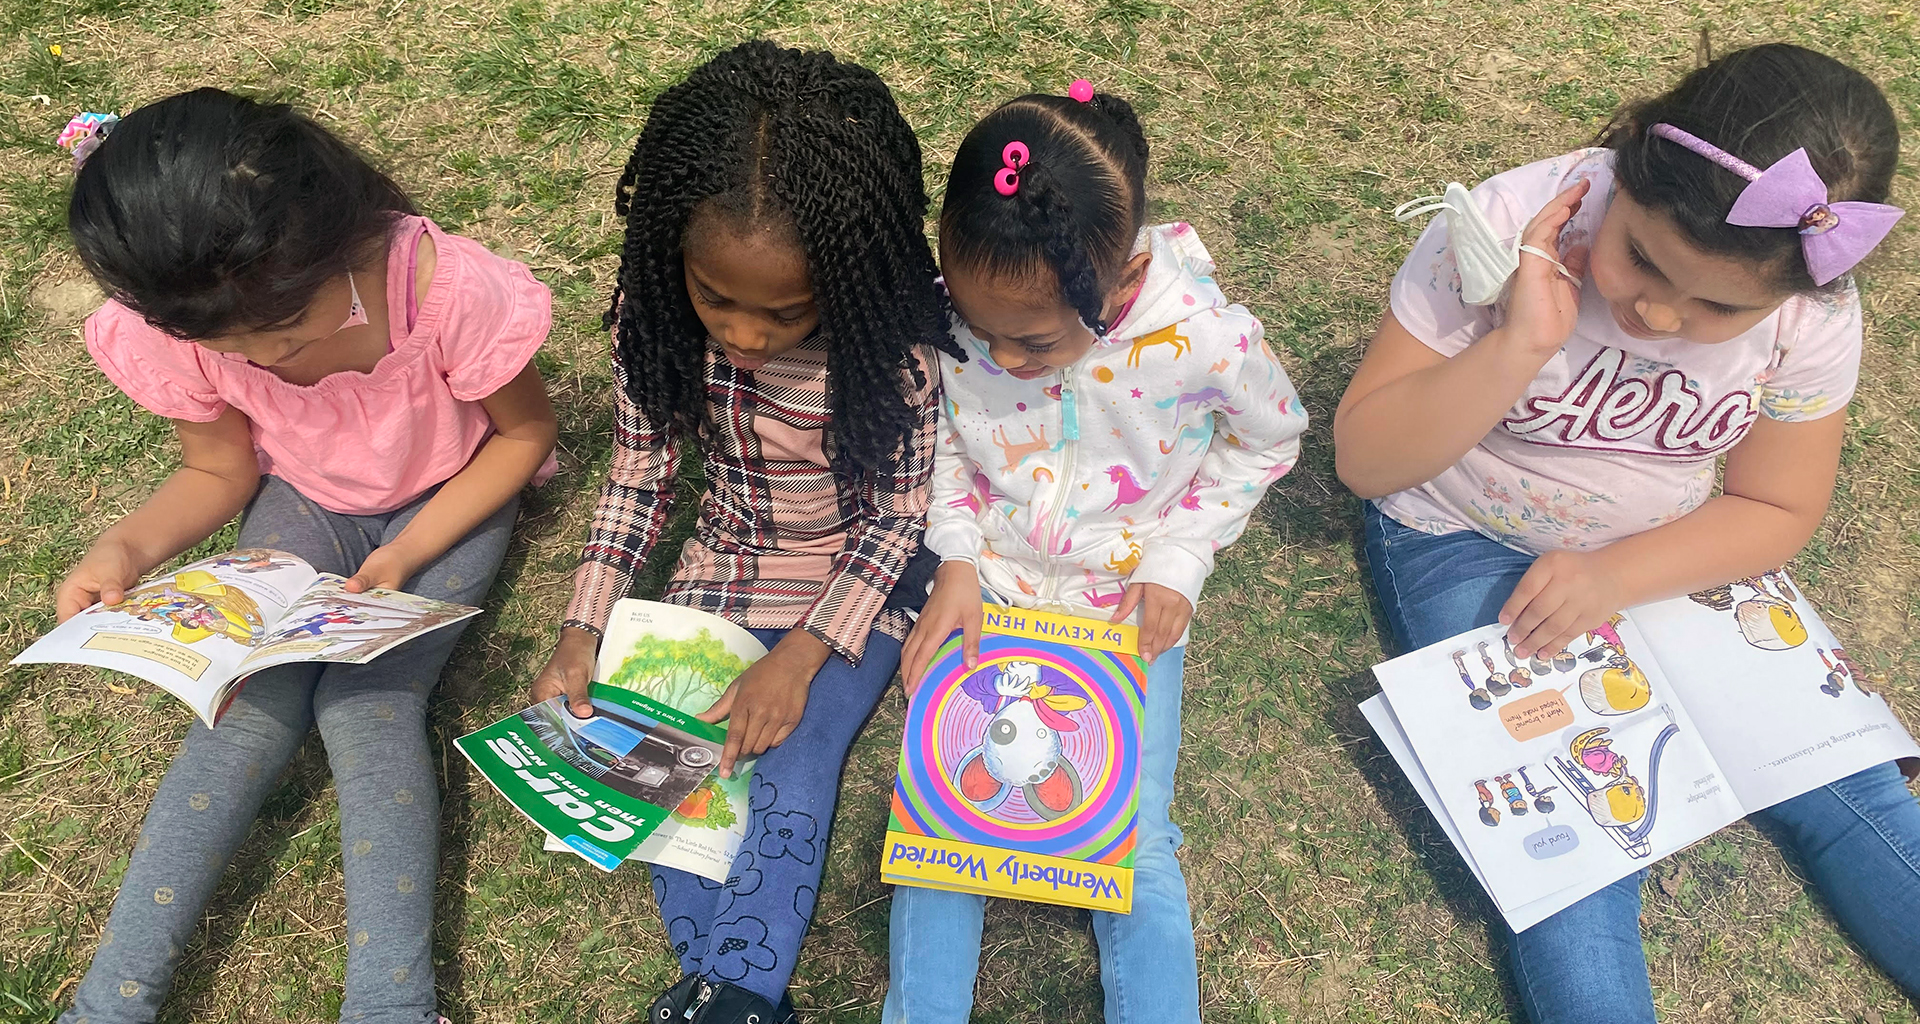 Four students on the grass reading their books